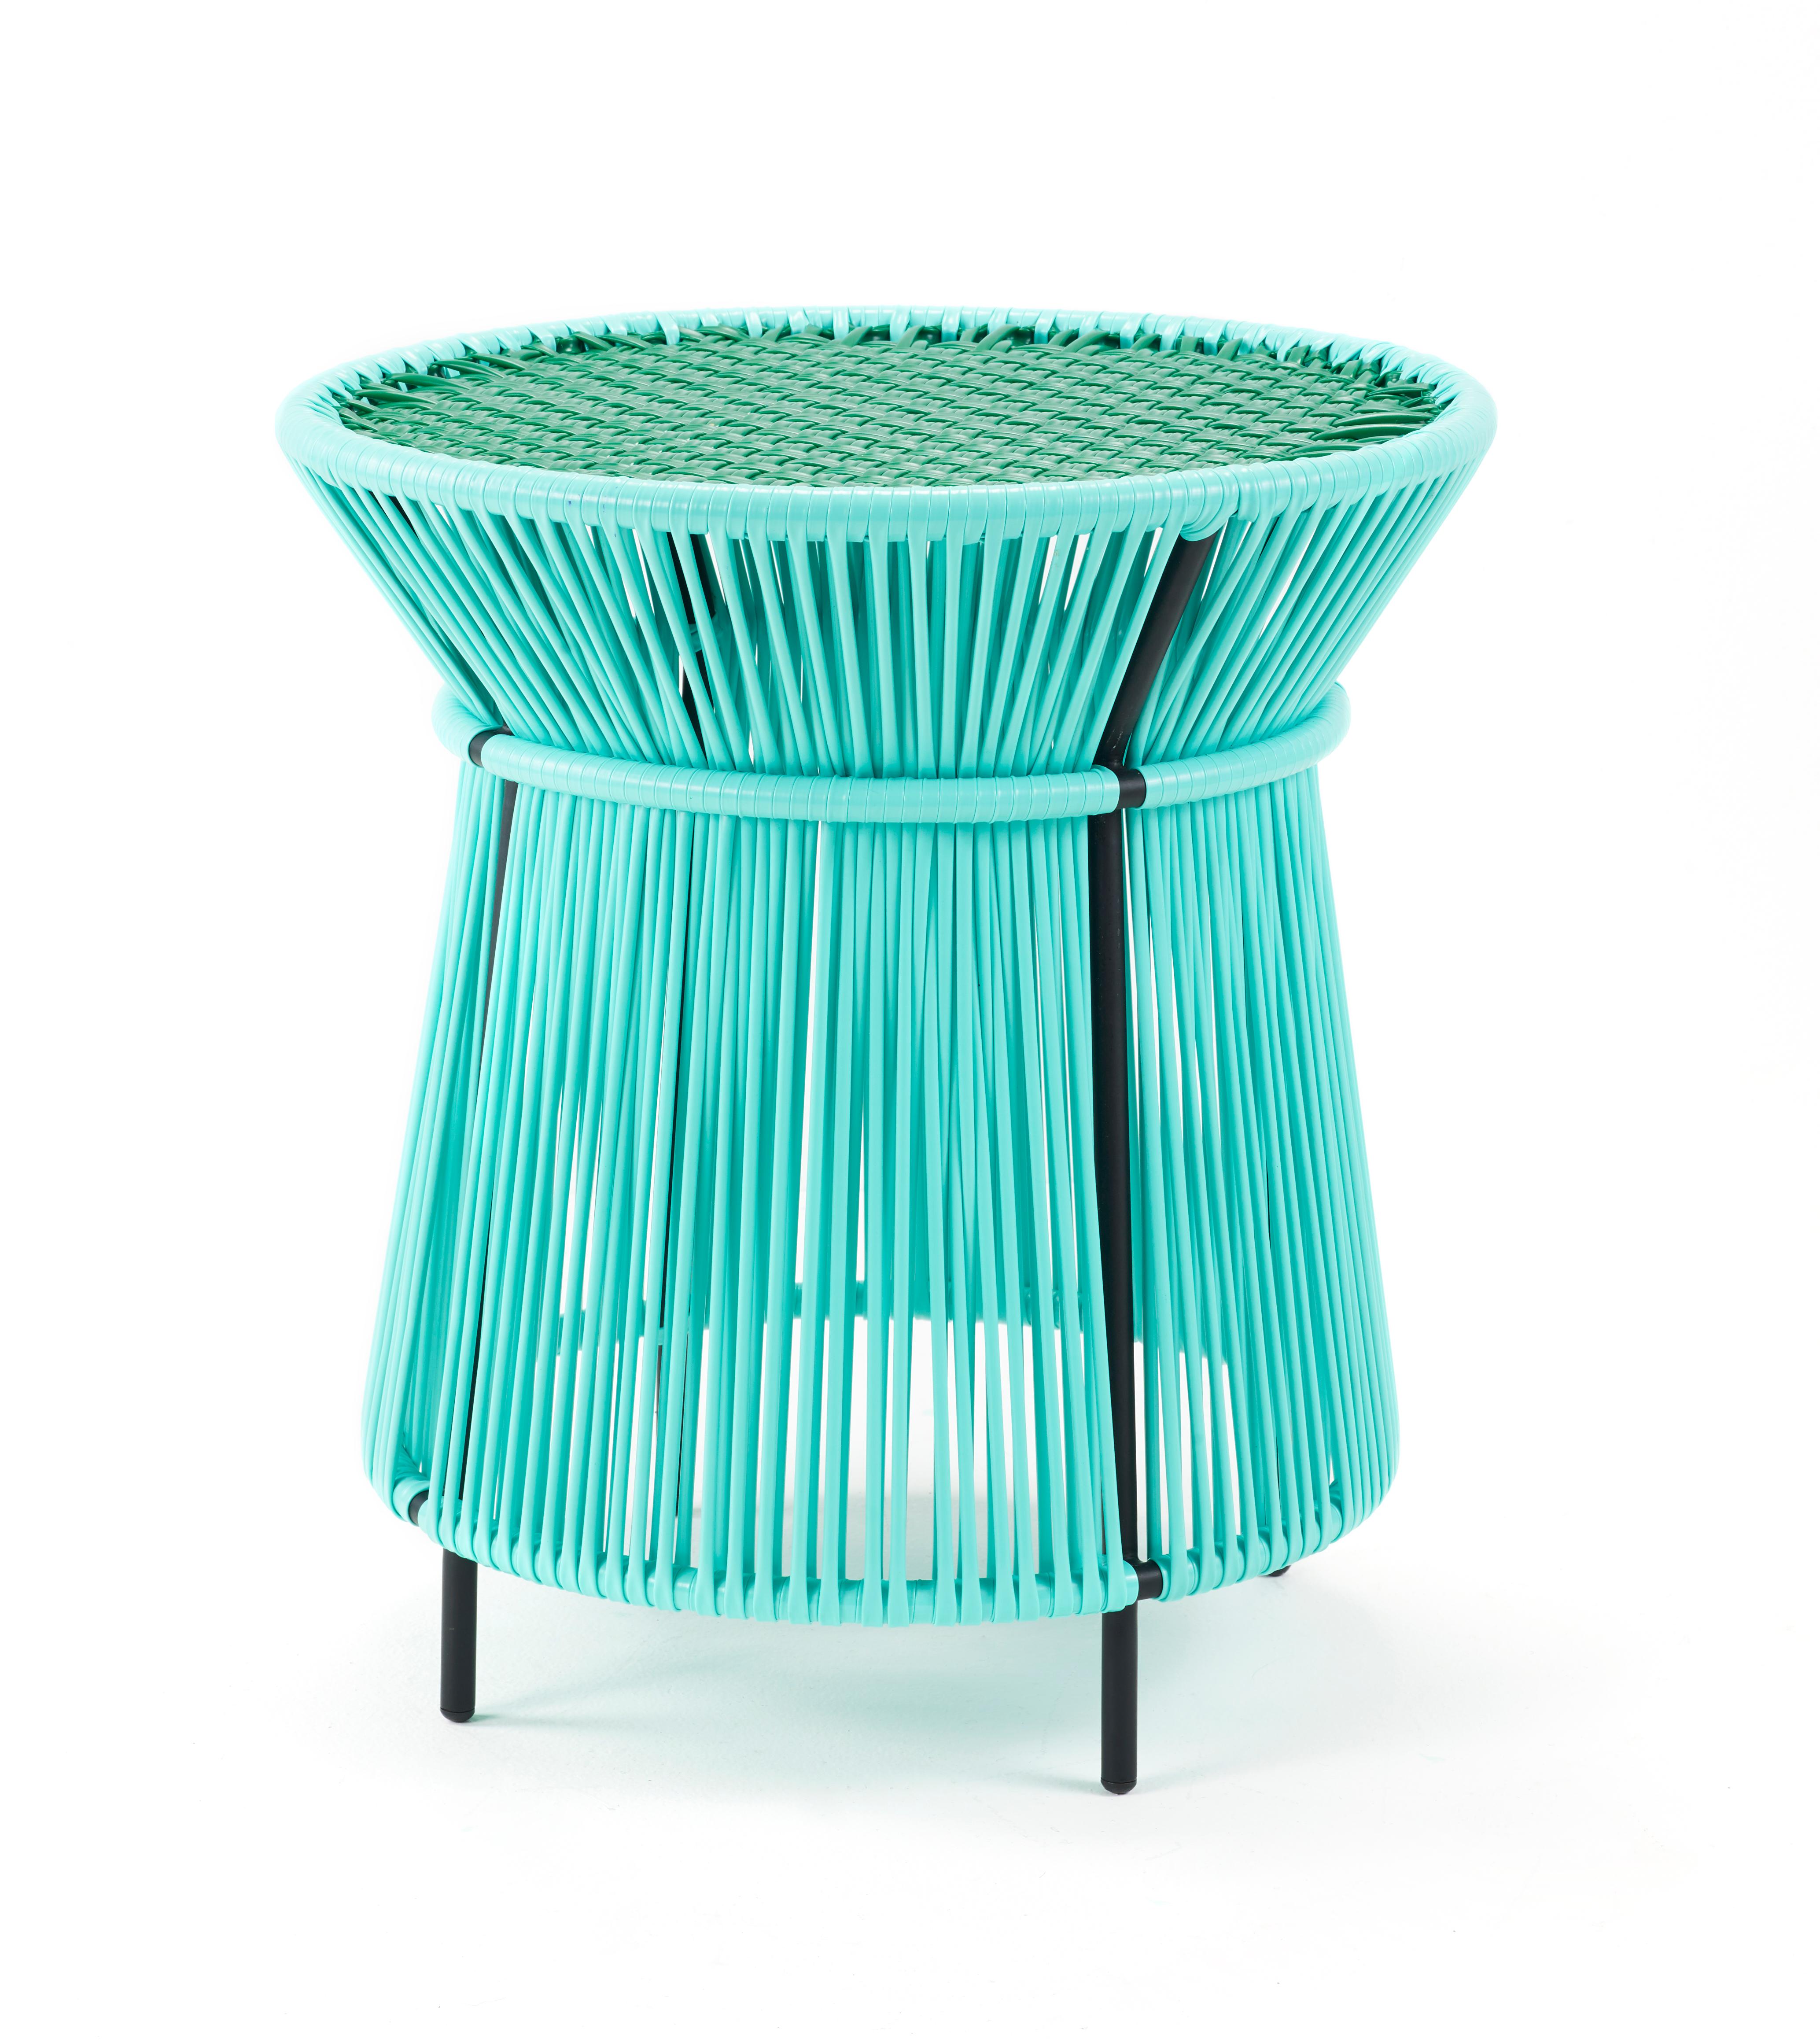 Mint caribe high table by Sebastian Herkner
Materials: Galvanized and powder-coated tubular steel. PVC strings are made from recycled plastic.
Technique: Made from recycled plastic and weaved by local craftspeople in Colombia. 
Dimensions: